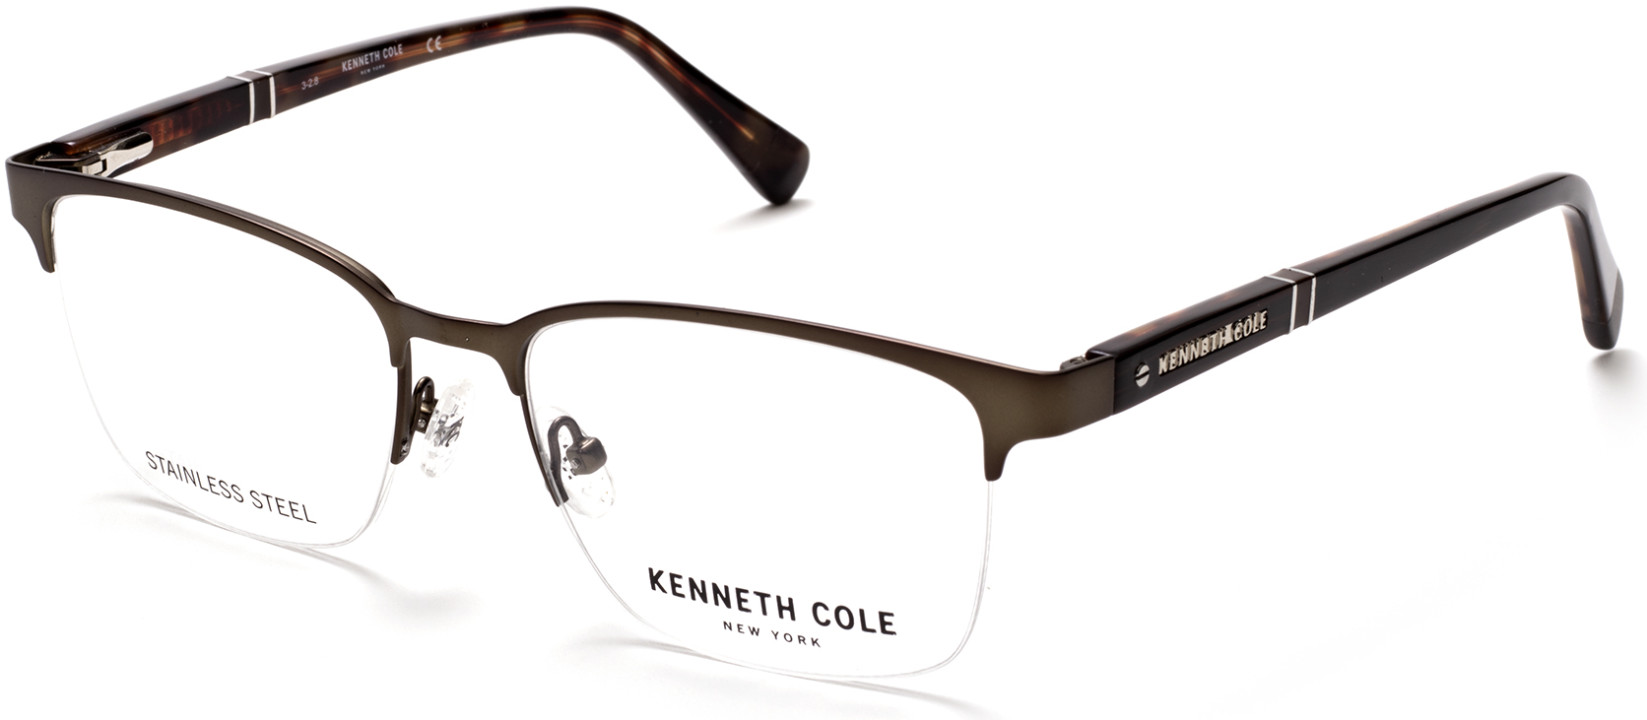 KENNETH COLE NY 0291 097